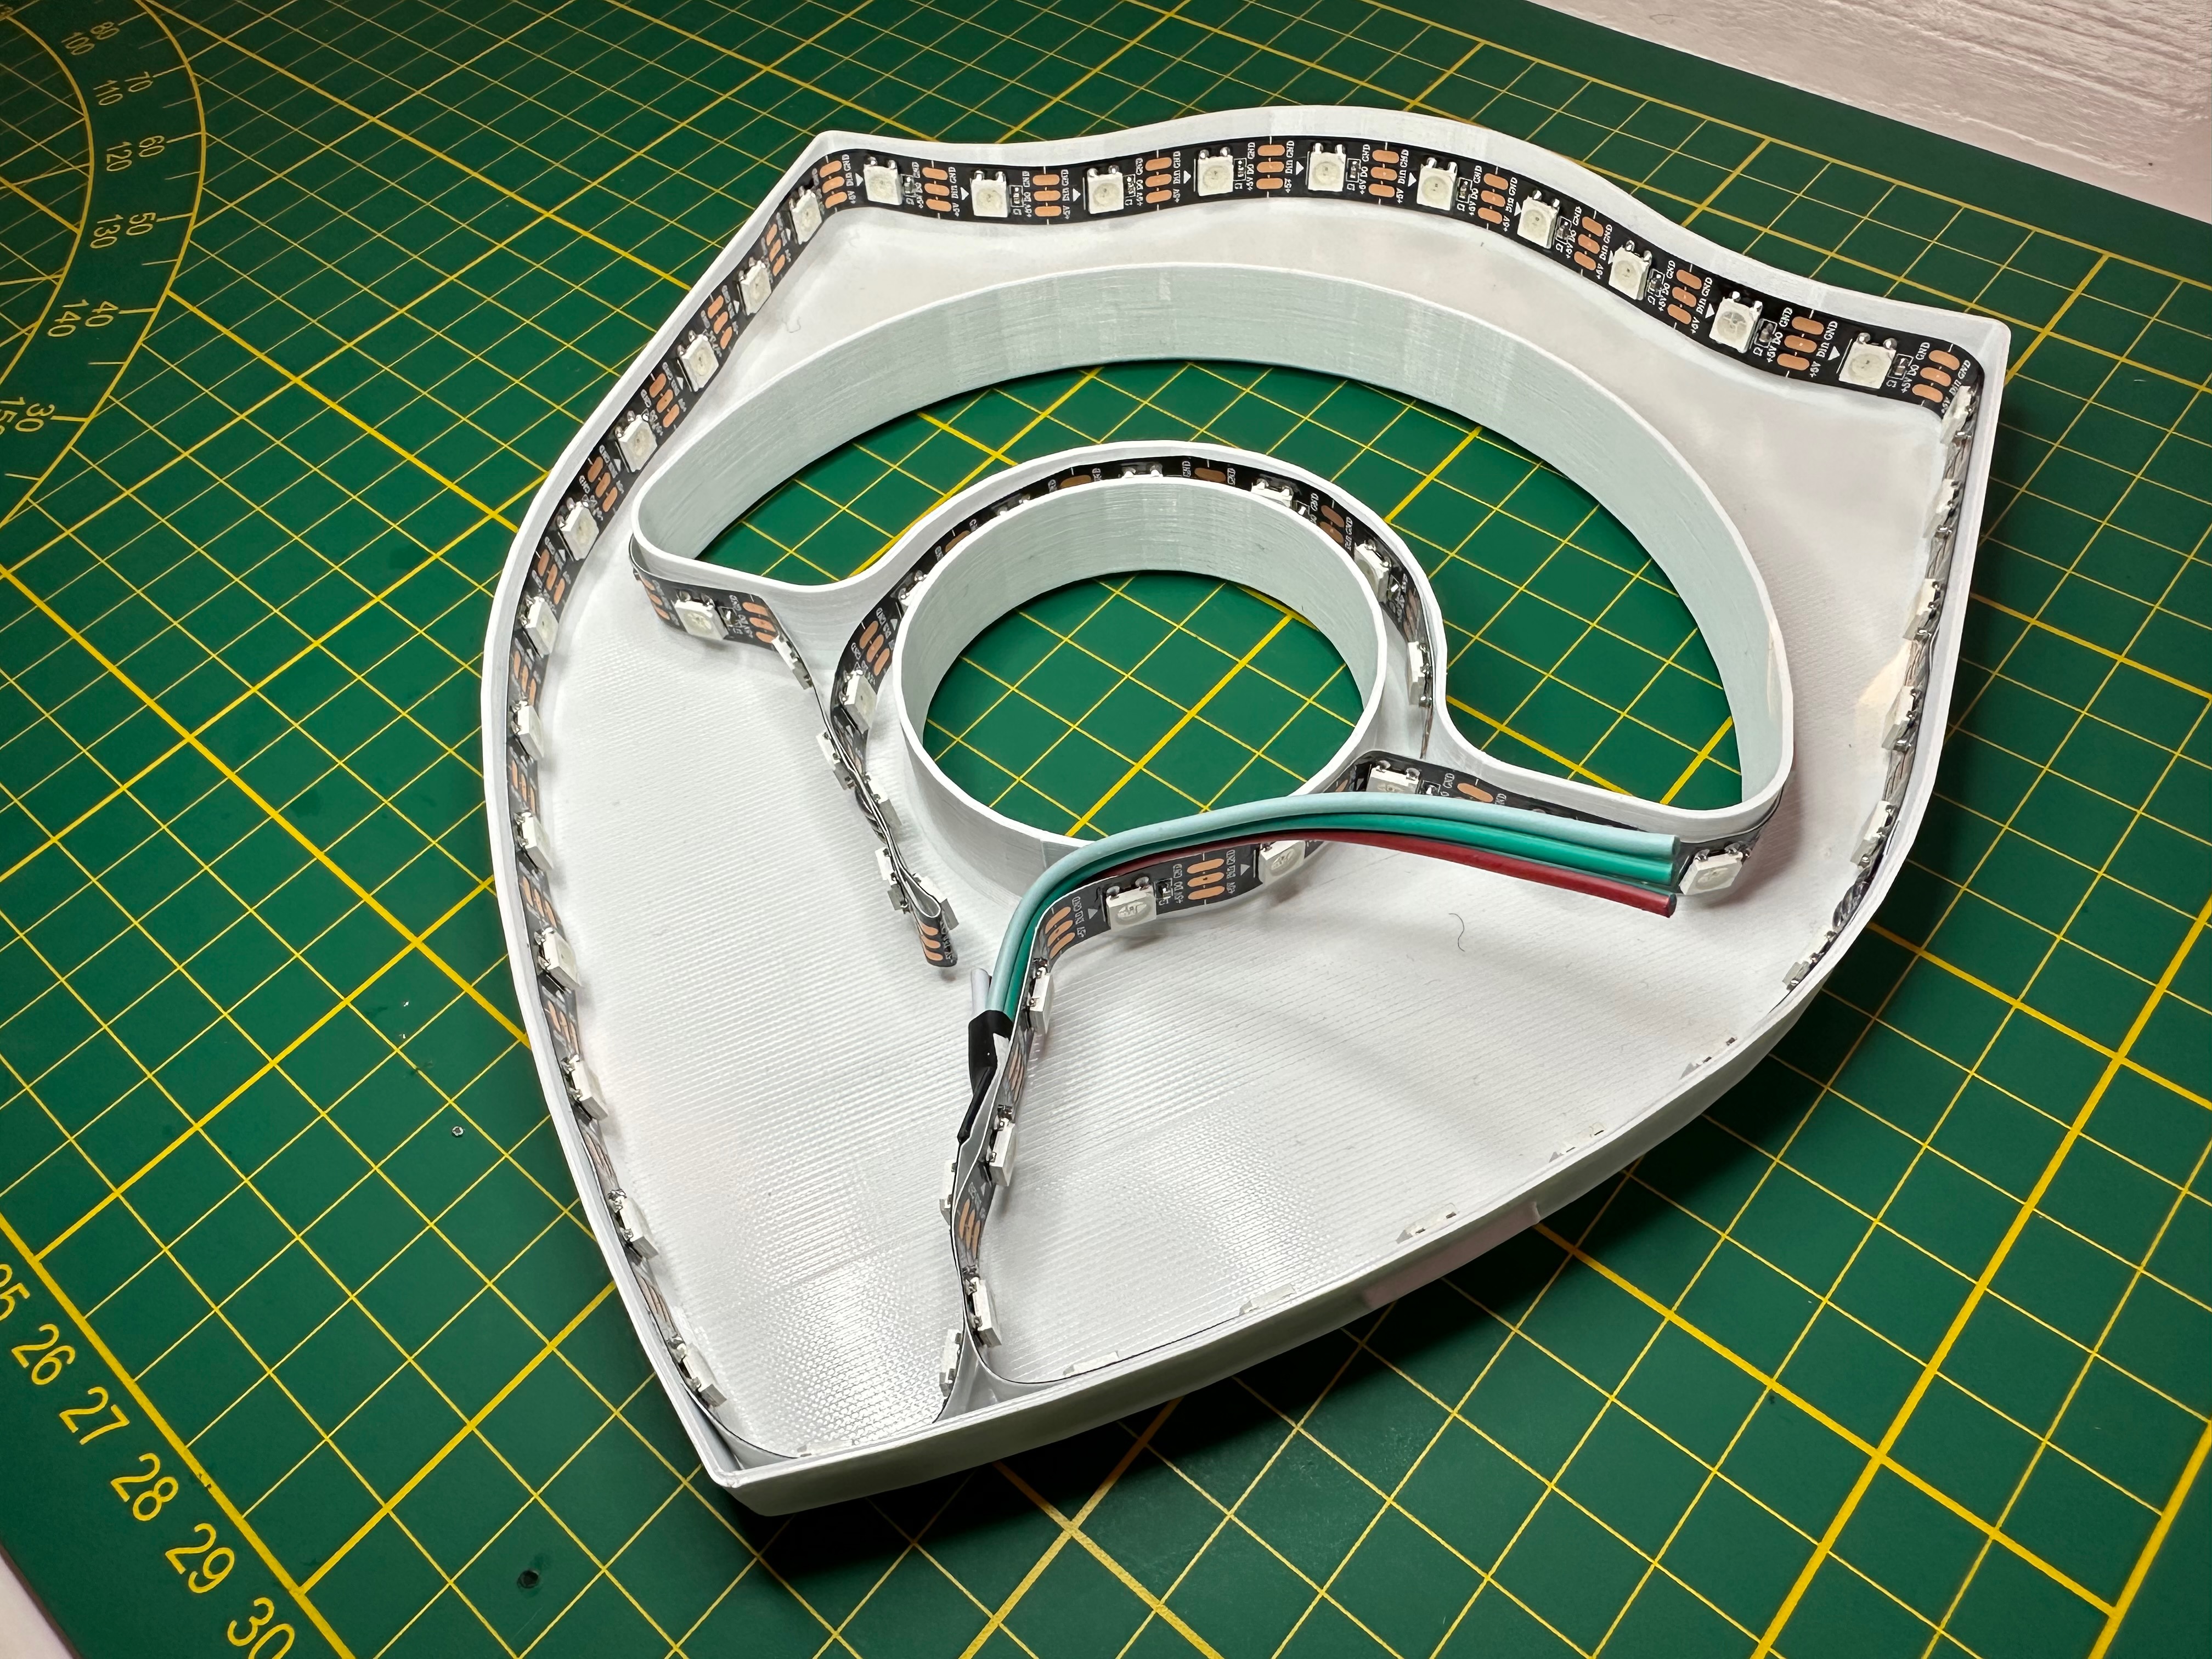 Path of the LED strip